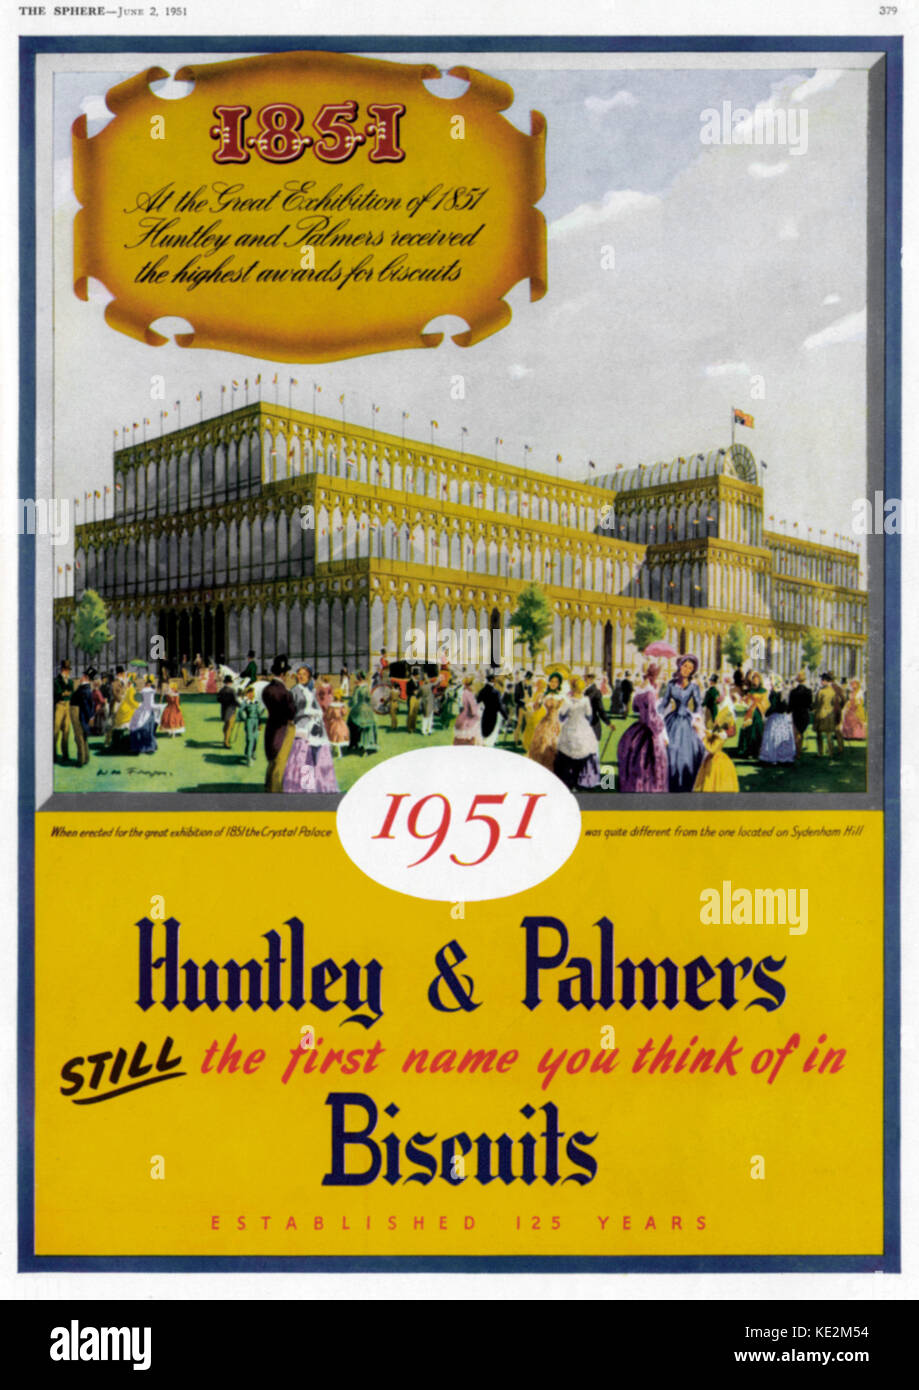 Advertisment for Huntley & Palmers Biscuts in the magazine 'the Sphere' 2 June 1951,  with illustration of Crystal Palace from The Great Exhibition in 1851. British firm of biscuit makers based in Reading, Berkshire. Founded in 1822 by Joseph Huntley as J. Huntley & Son. Stock Photo